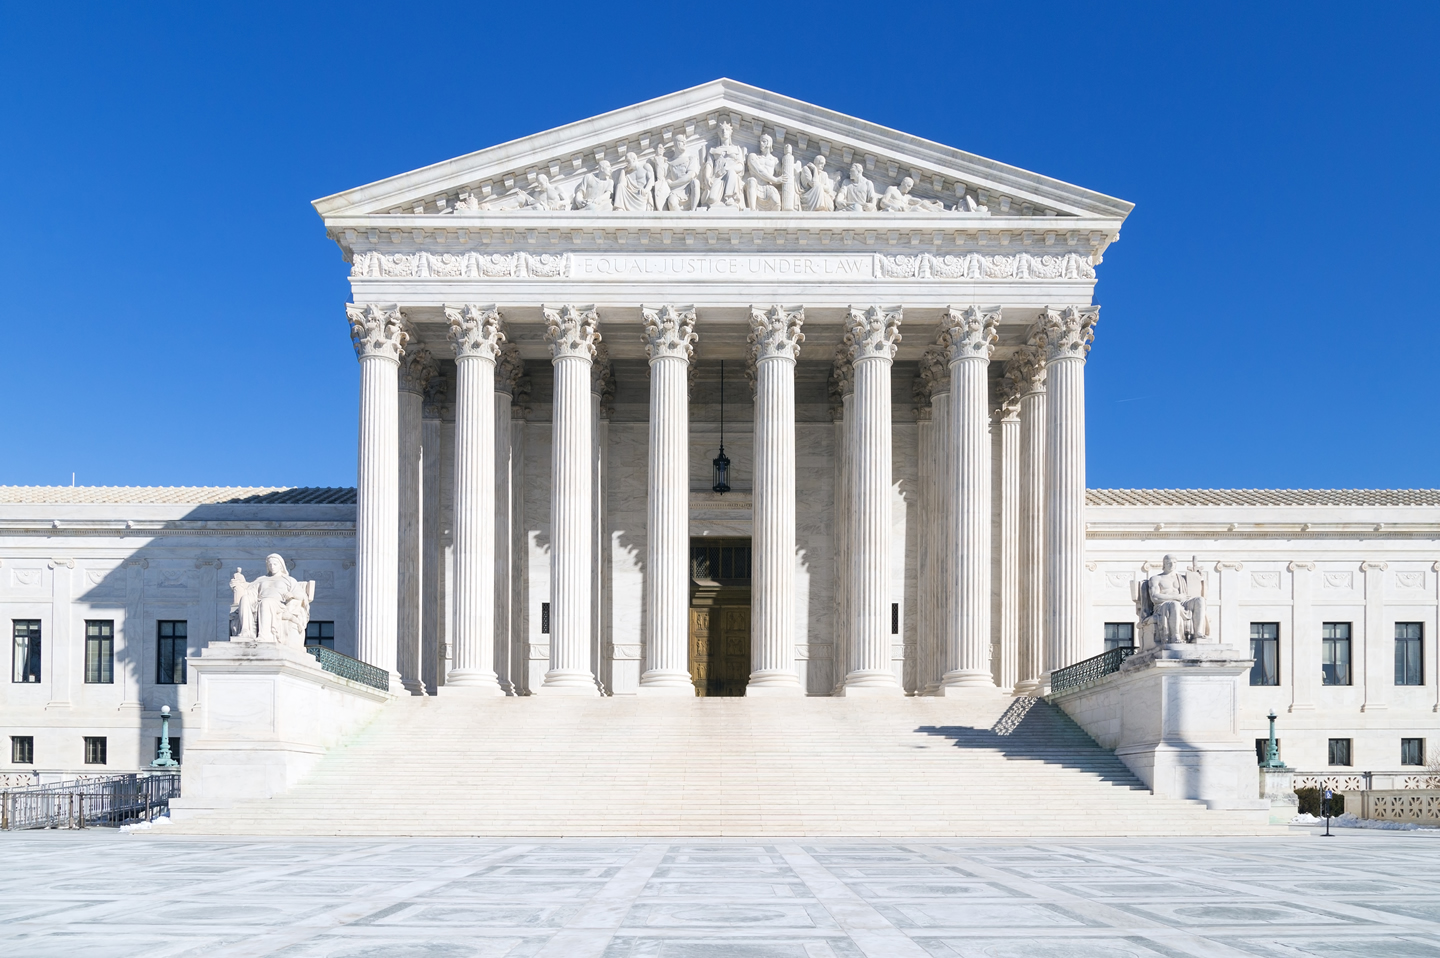 Supreme Court Preview: What Is in Store for October Term 2020?